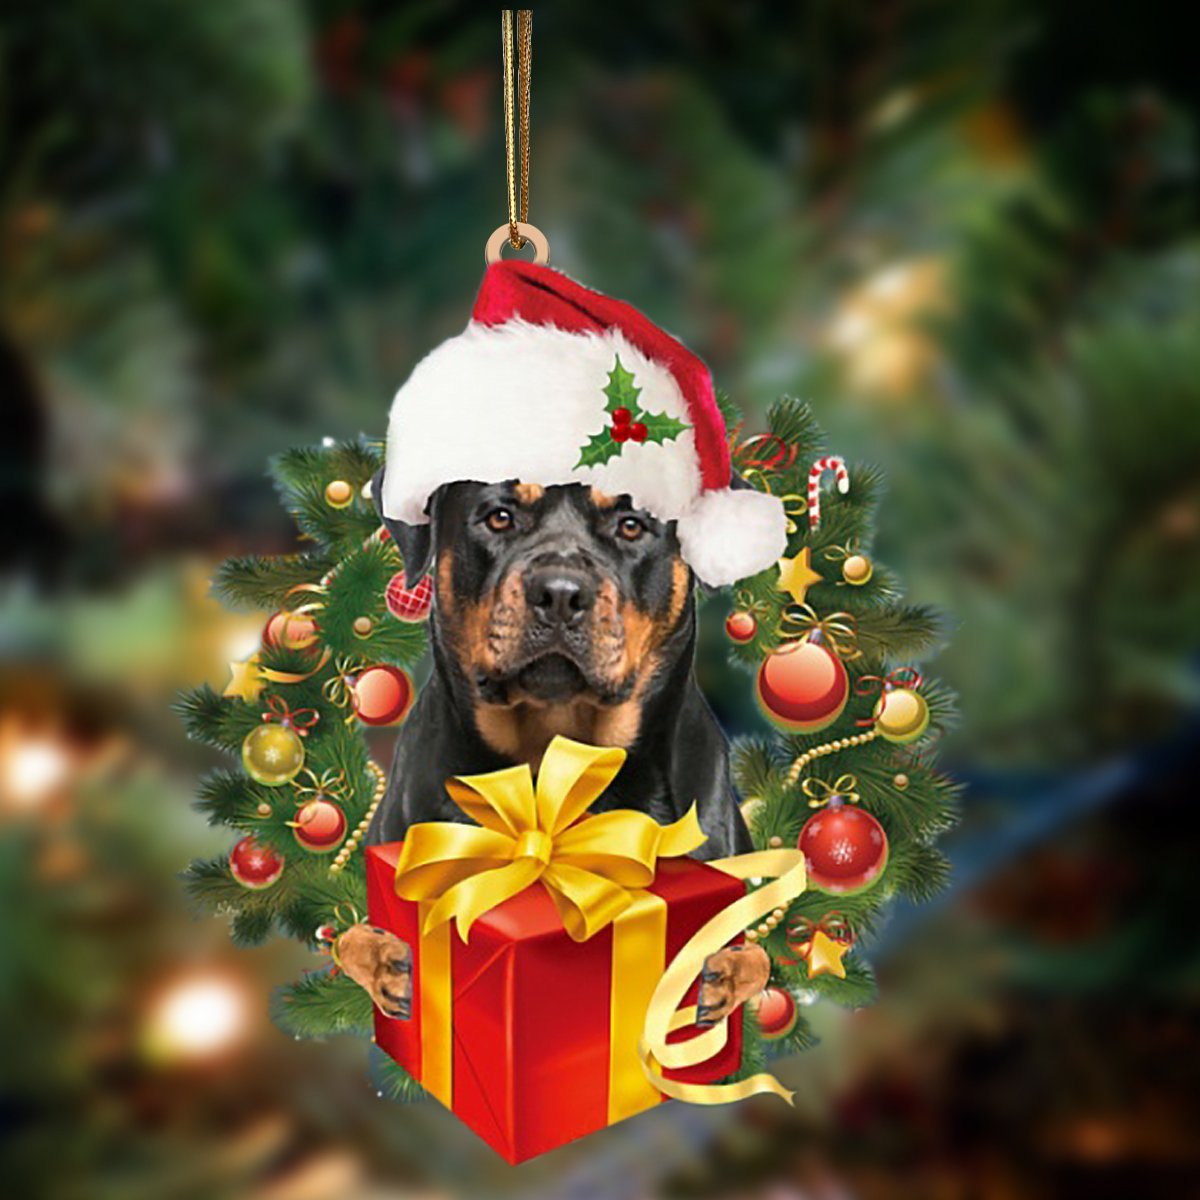 Rottweiler 2 Give Gifts Hanging Ornament - Flat Acrylic Dog Ornament – Dog Lovers Gifts For Him Or Her